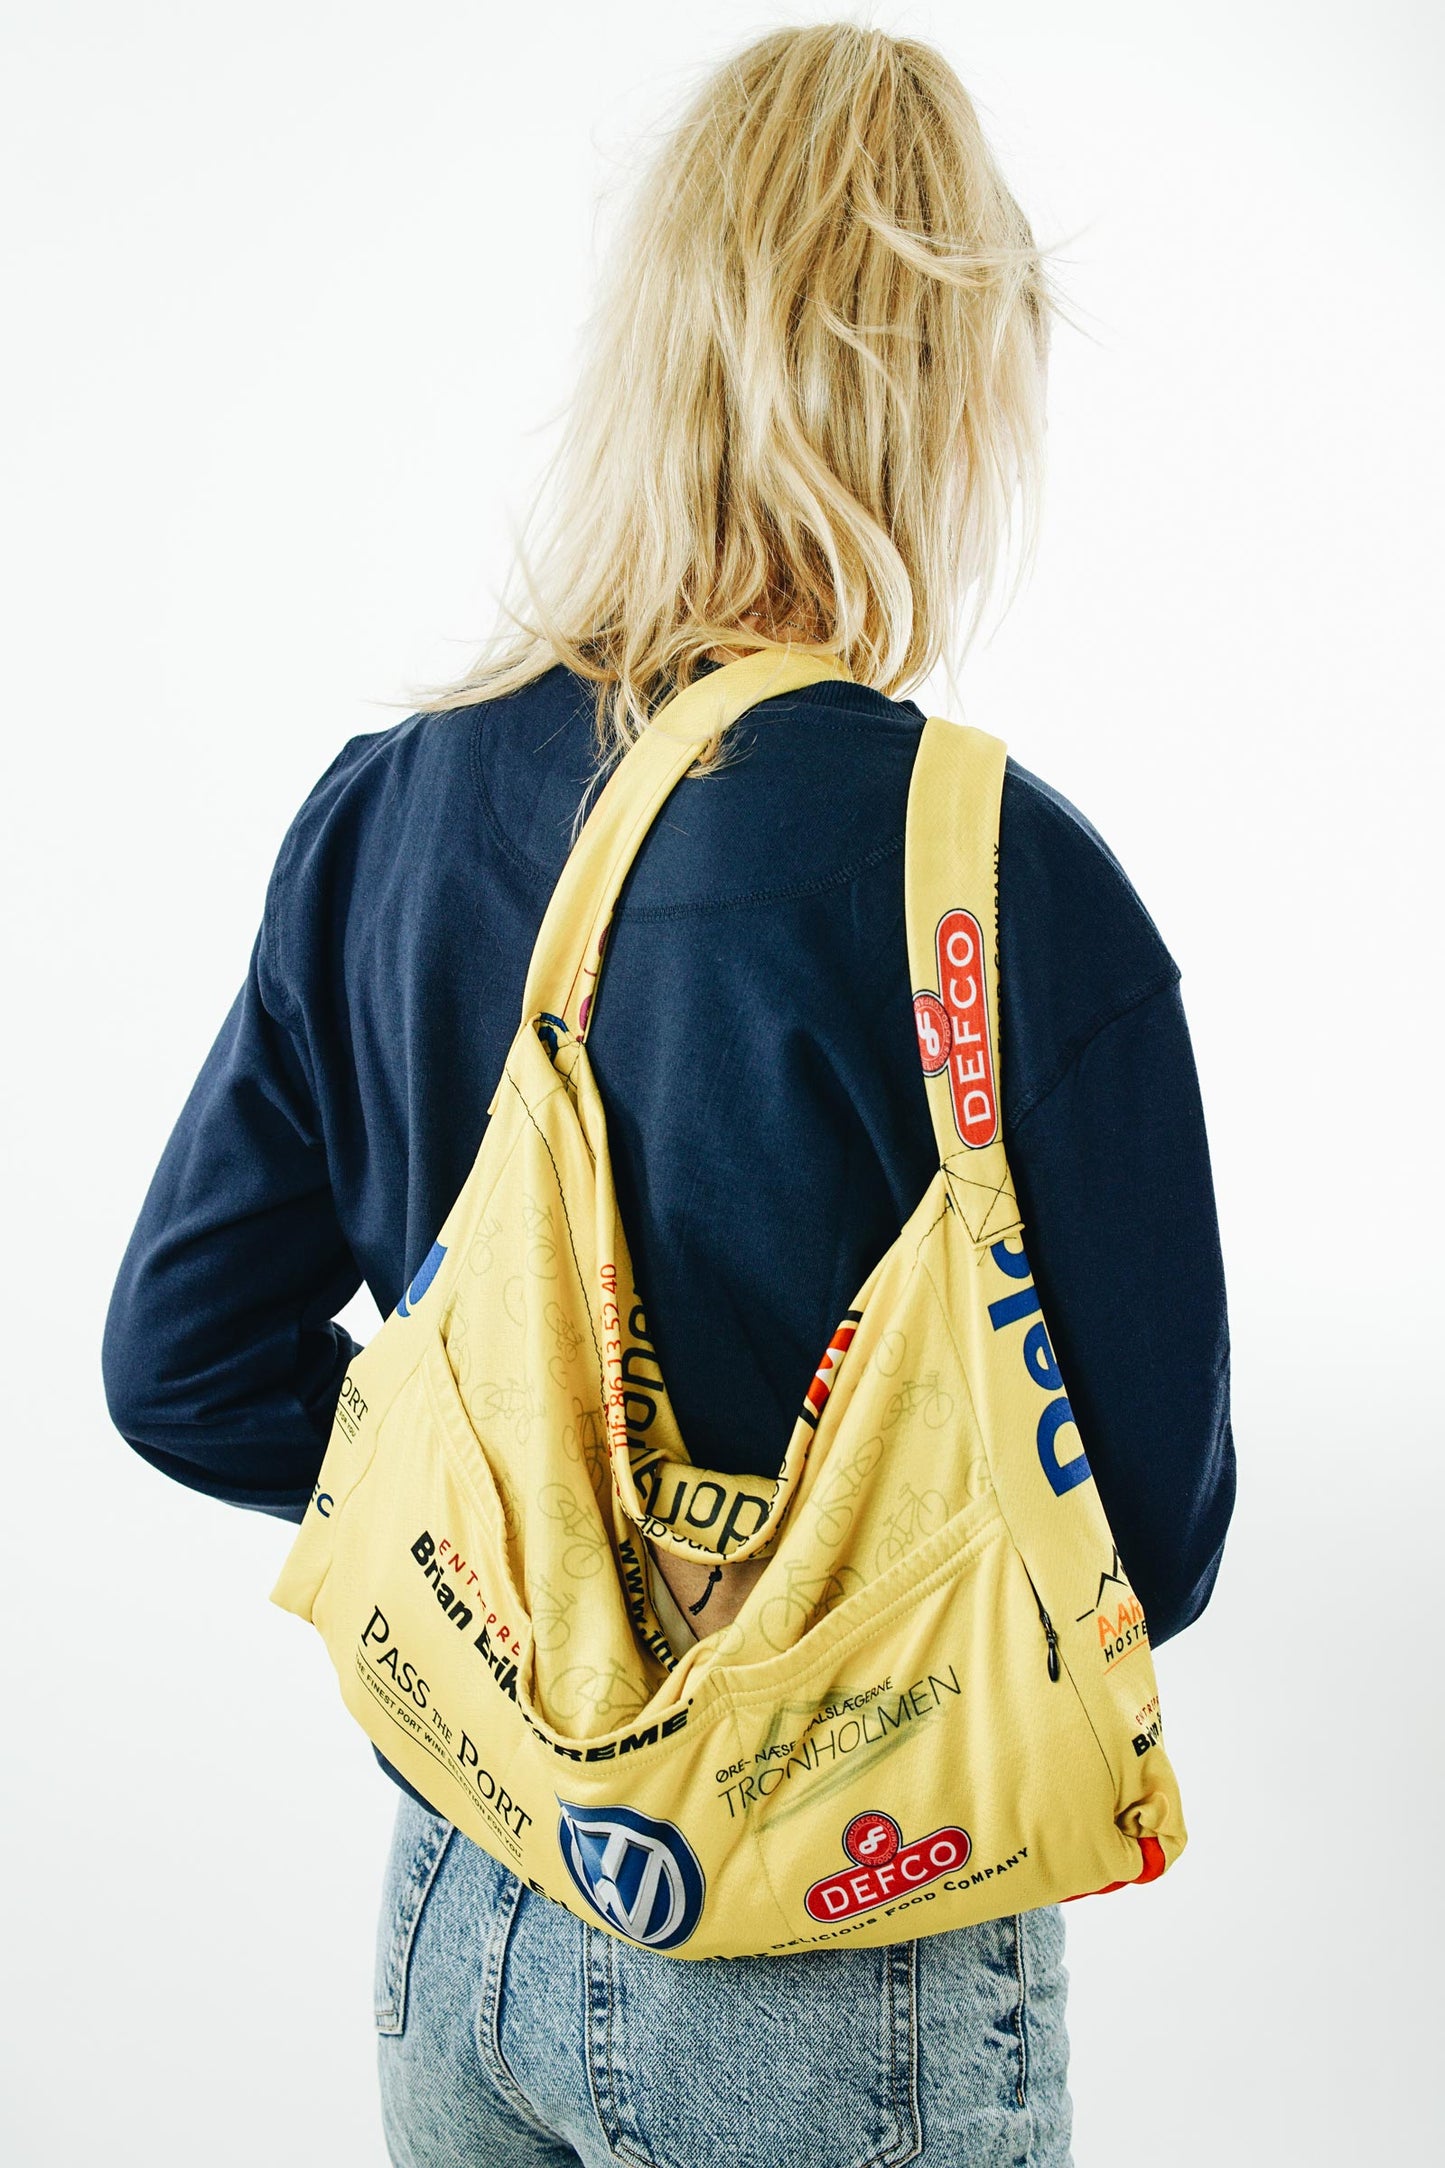 Upcycled Musette(Tote bag)